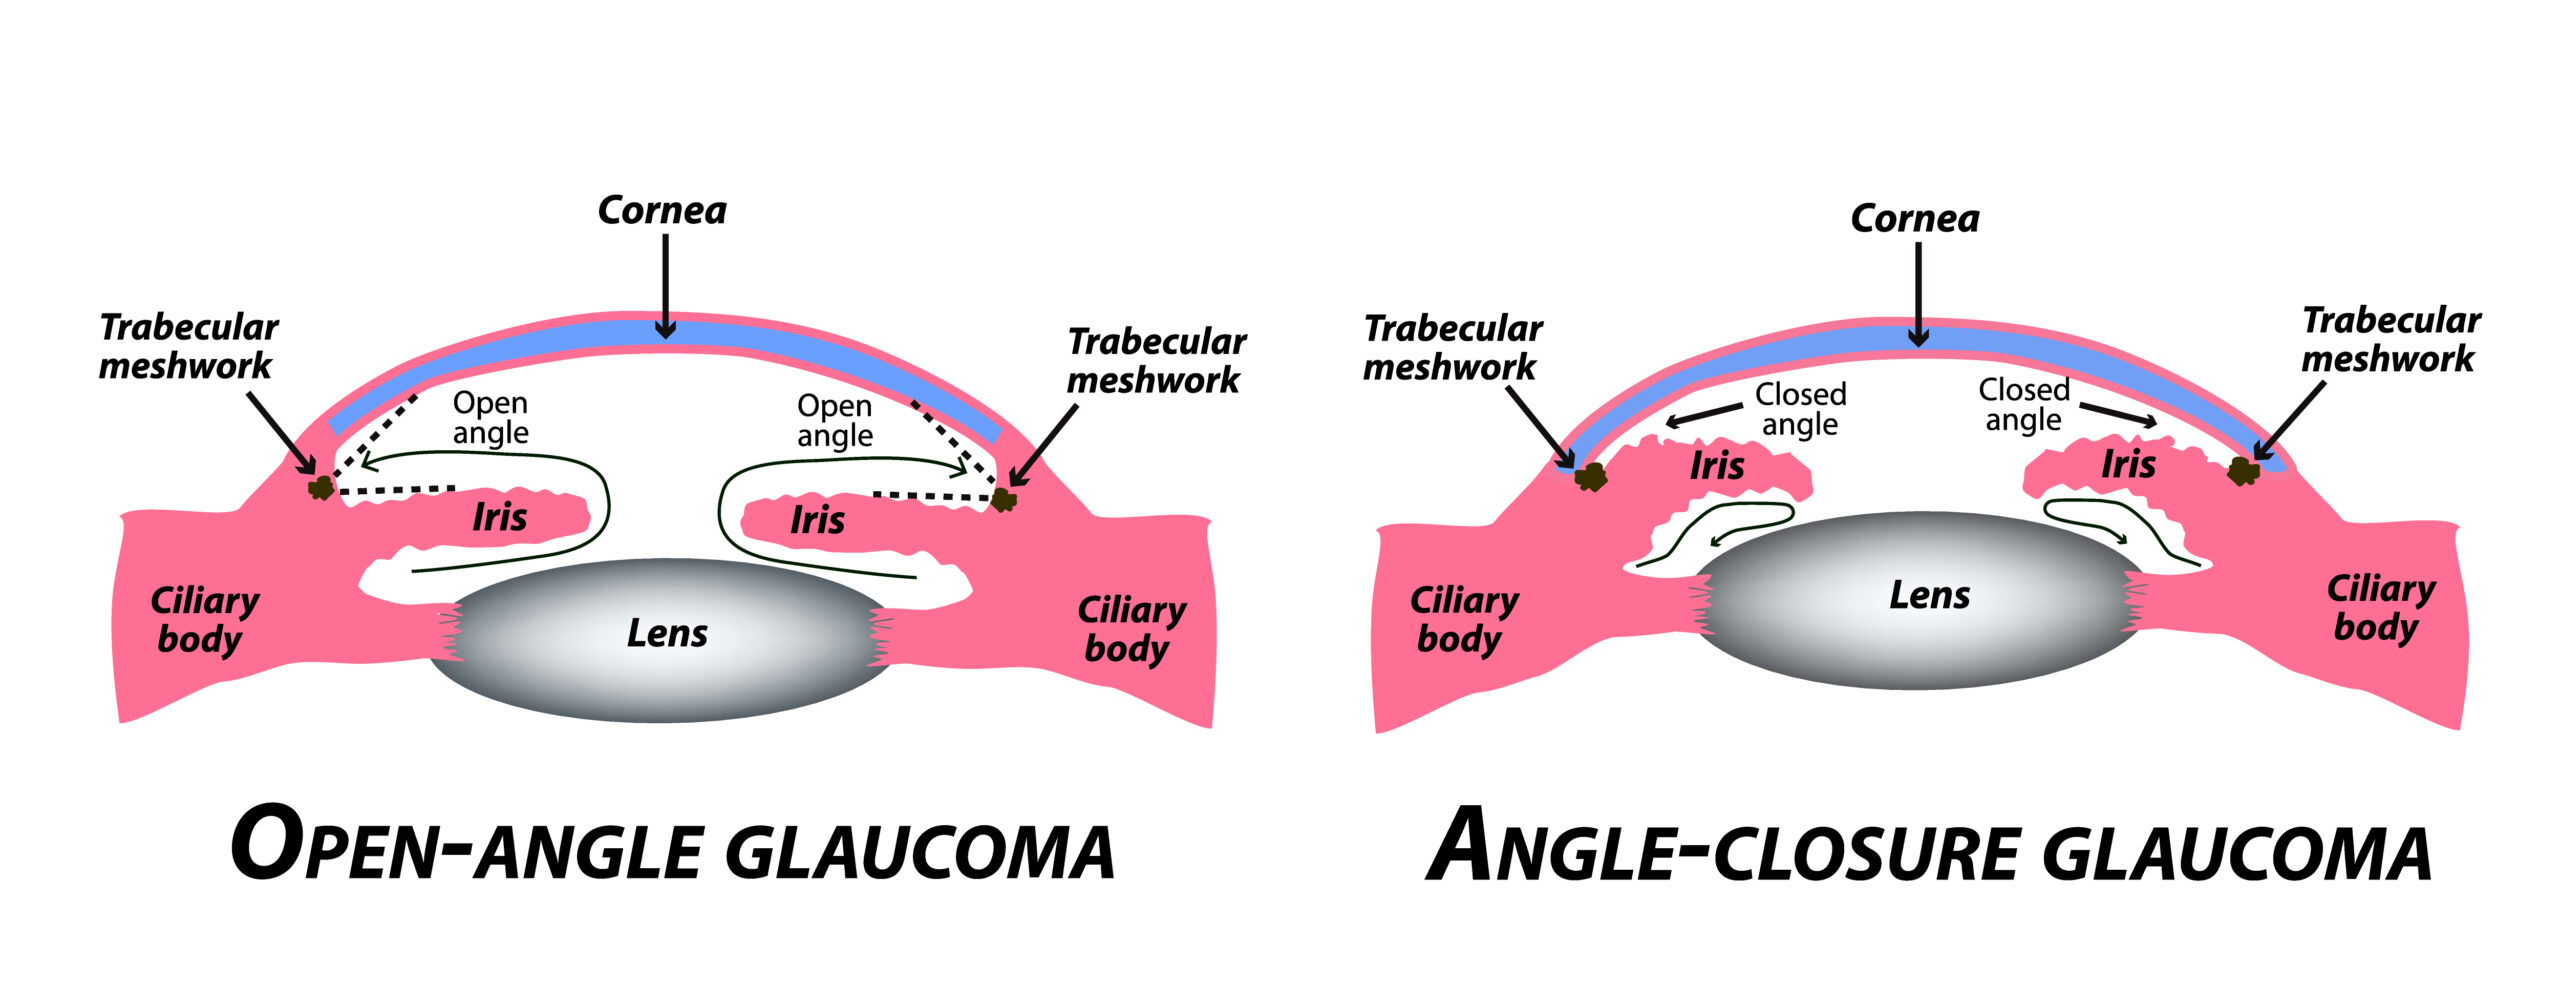 Types of glaucoma. Open-angle and angle-closure glaucoma. The anatomical structure of the eye. Infographics. illustration on isolated background.